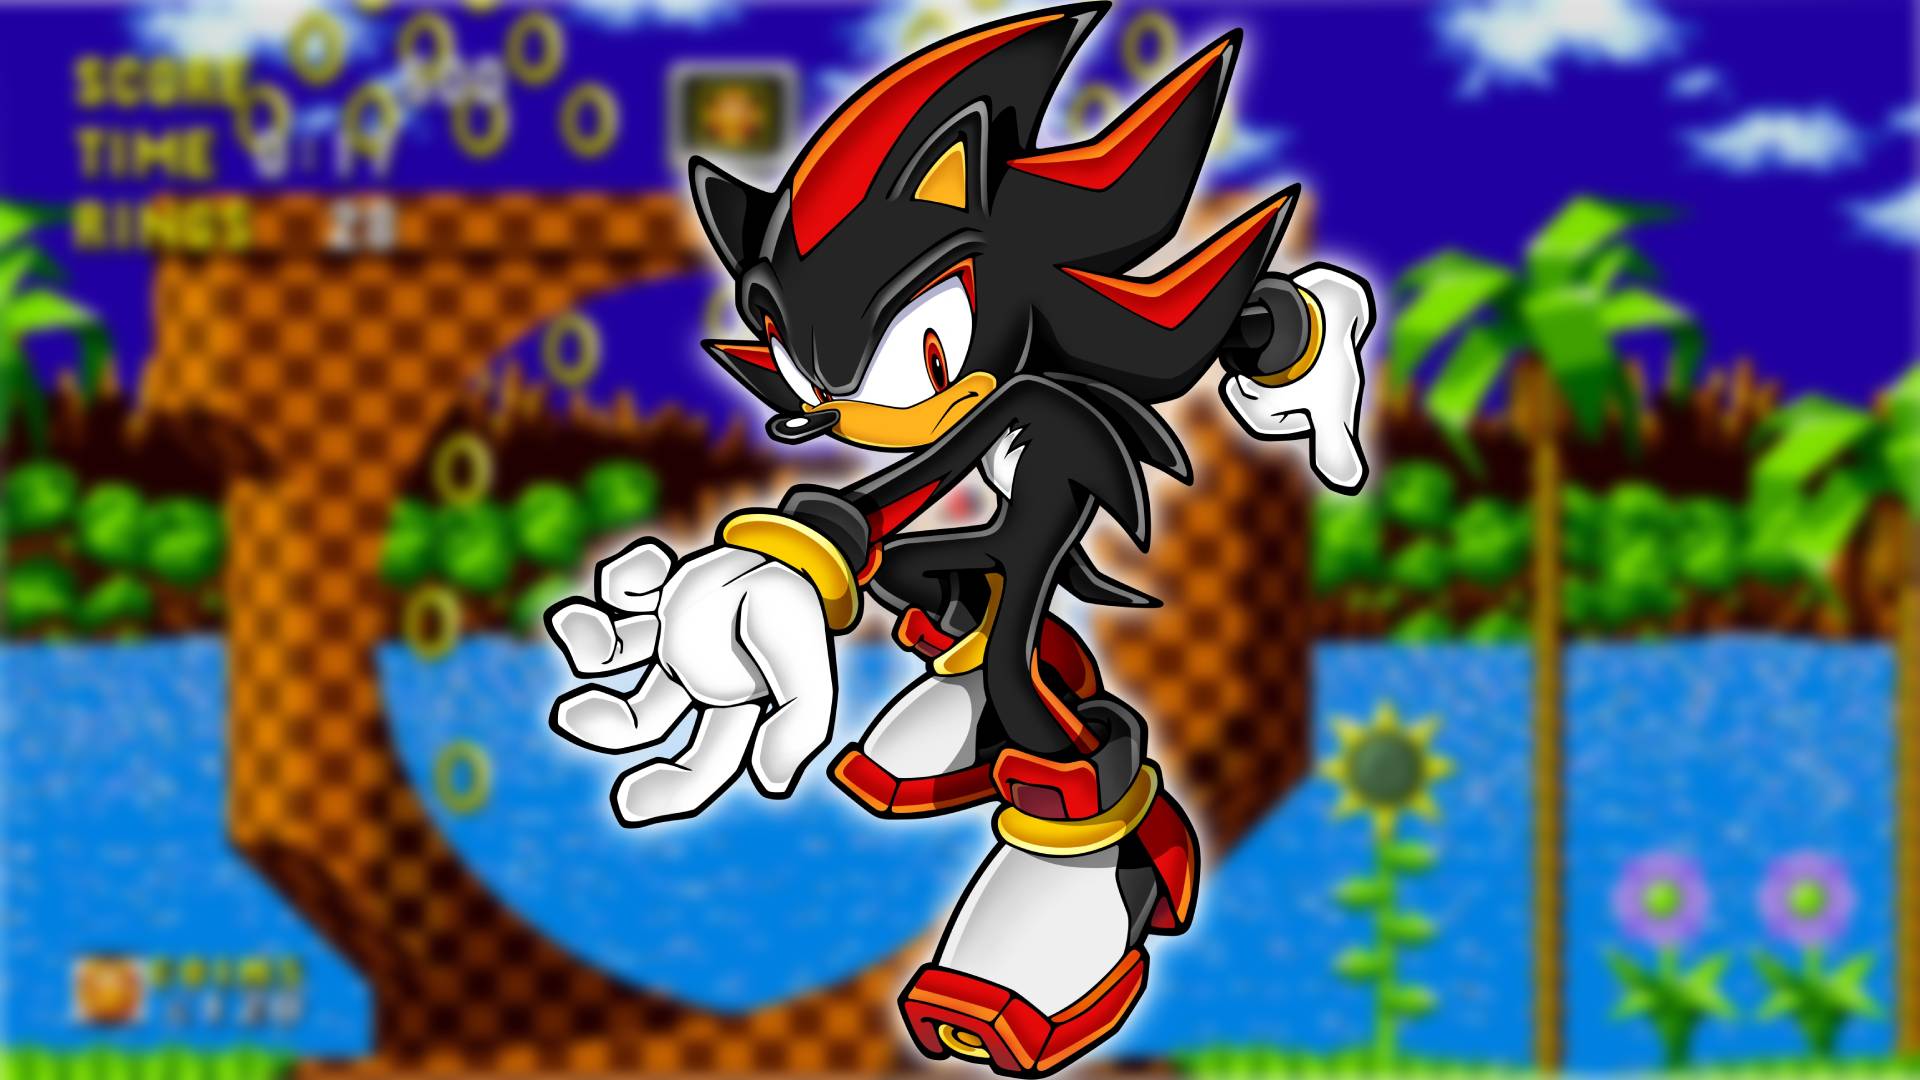 Sonic the Hedgehog: Shadow the Hedgehog is visible